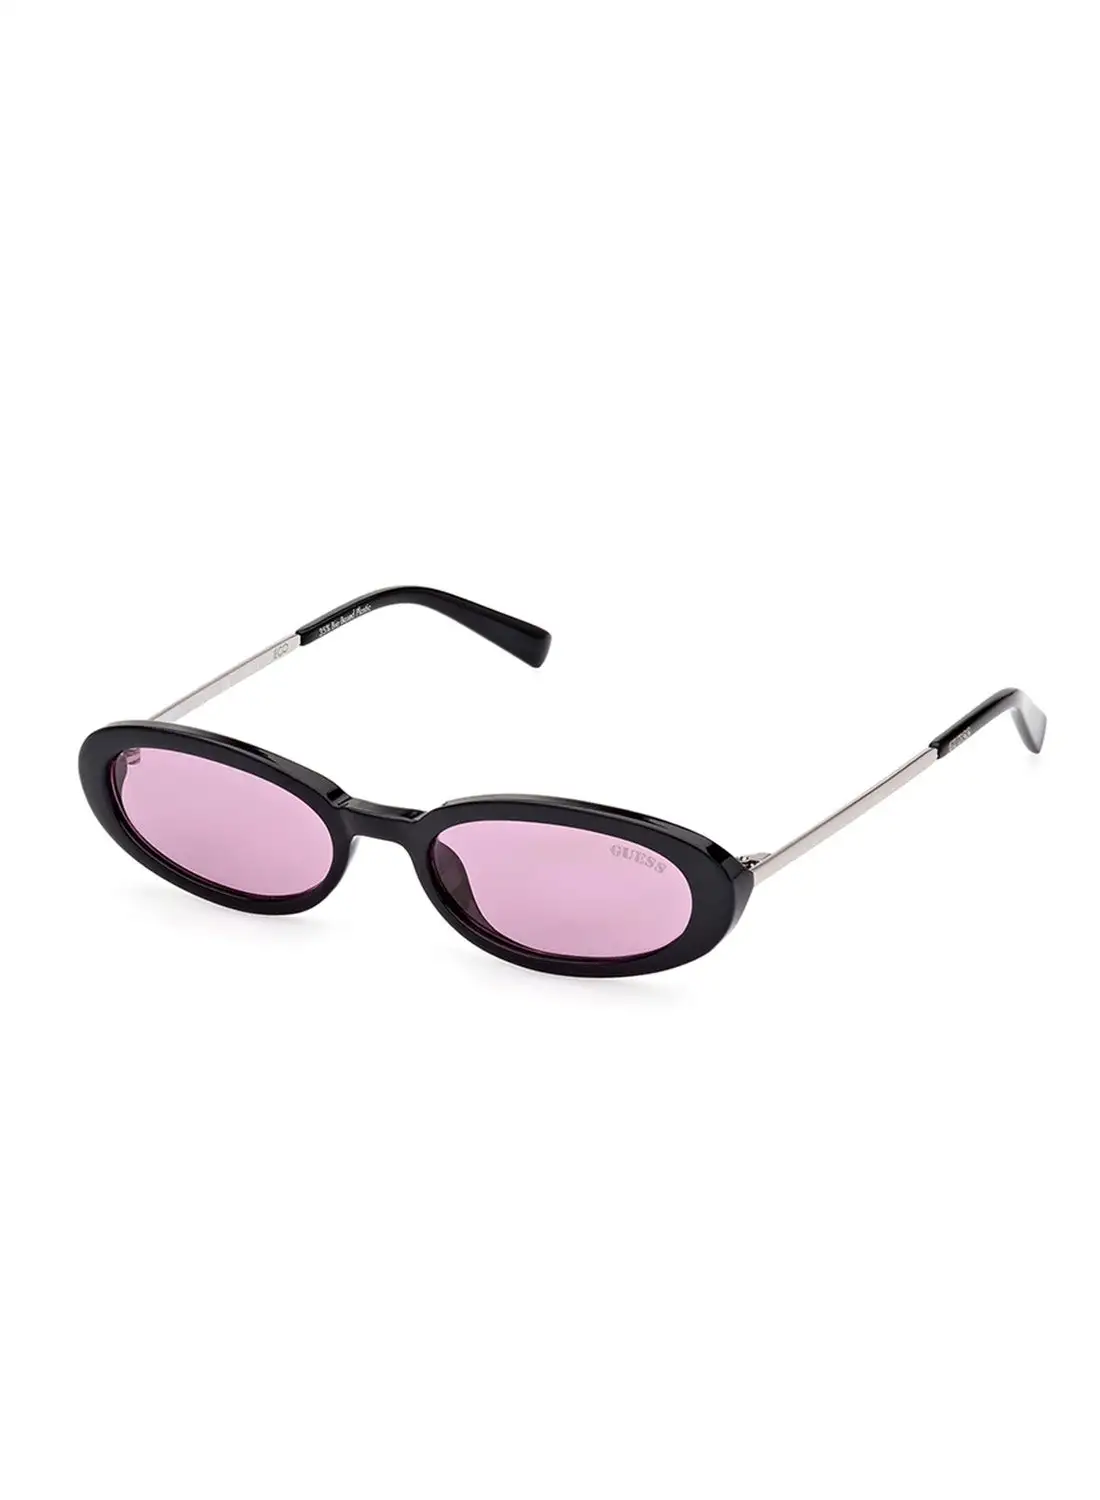 GUESS Unisex UV Protection Oval Shape Sunglasses - GU827701Y51 - Lens Size: 51 Mm